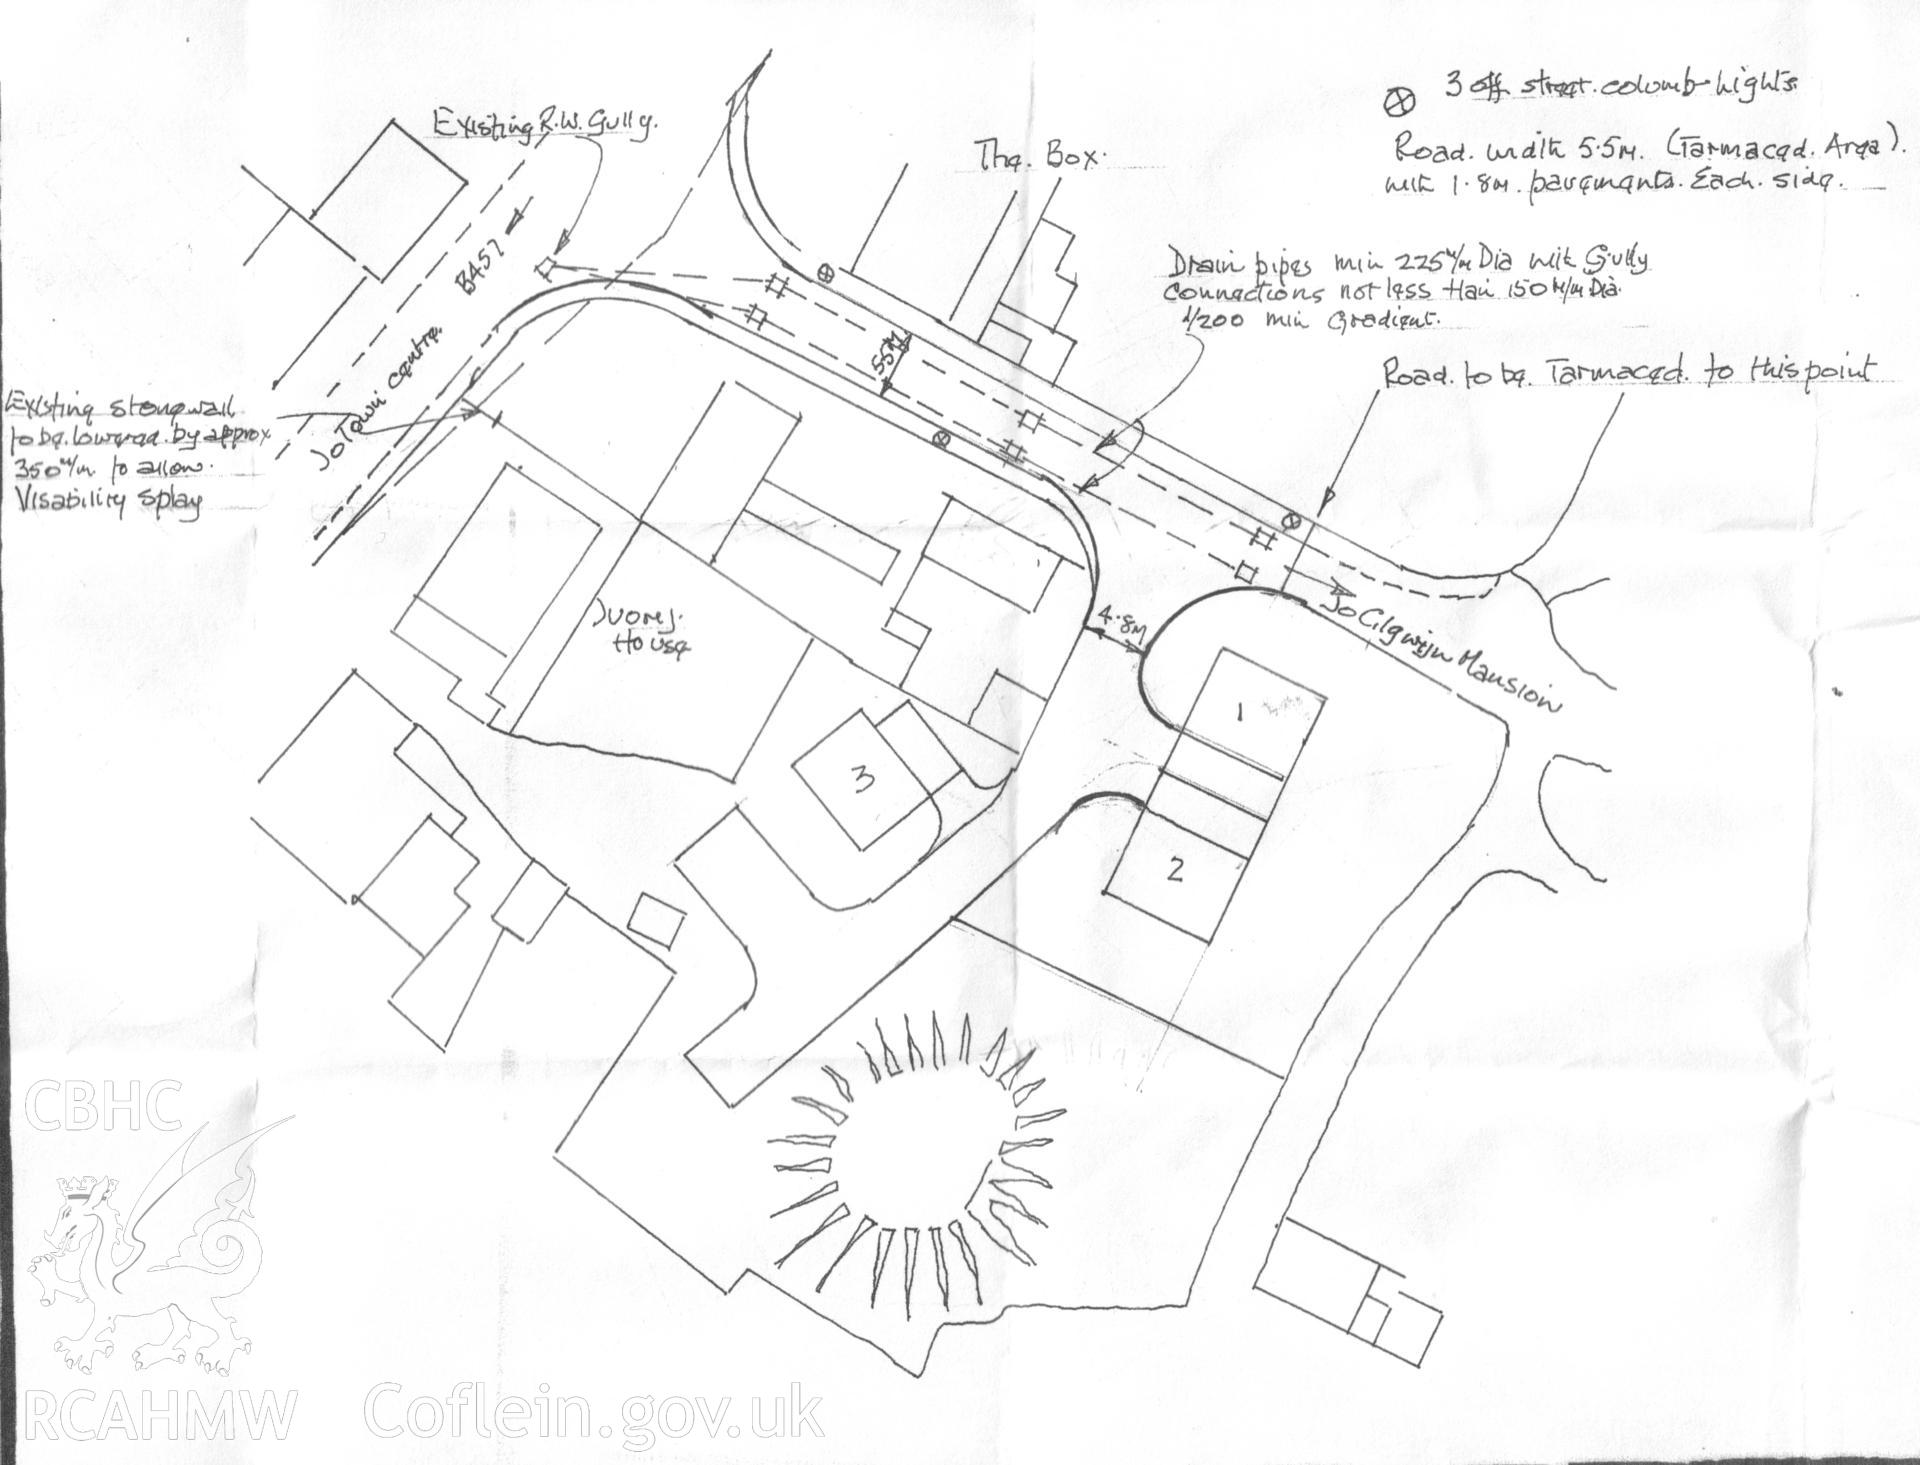 Development plan from archaeological work at the rear of Ivory House, Adpar, Newcastle Emlyn carried out by Cambrian Archaeological Projects, 2009.